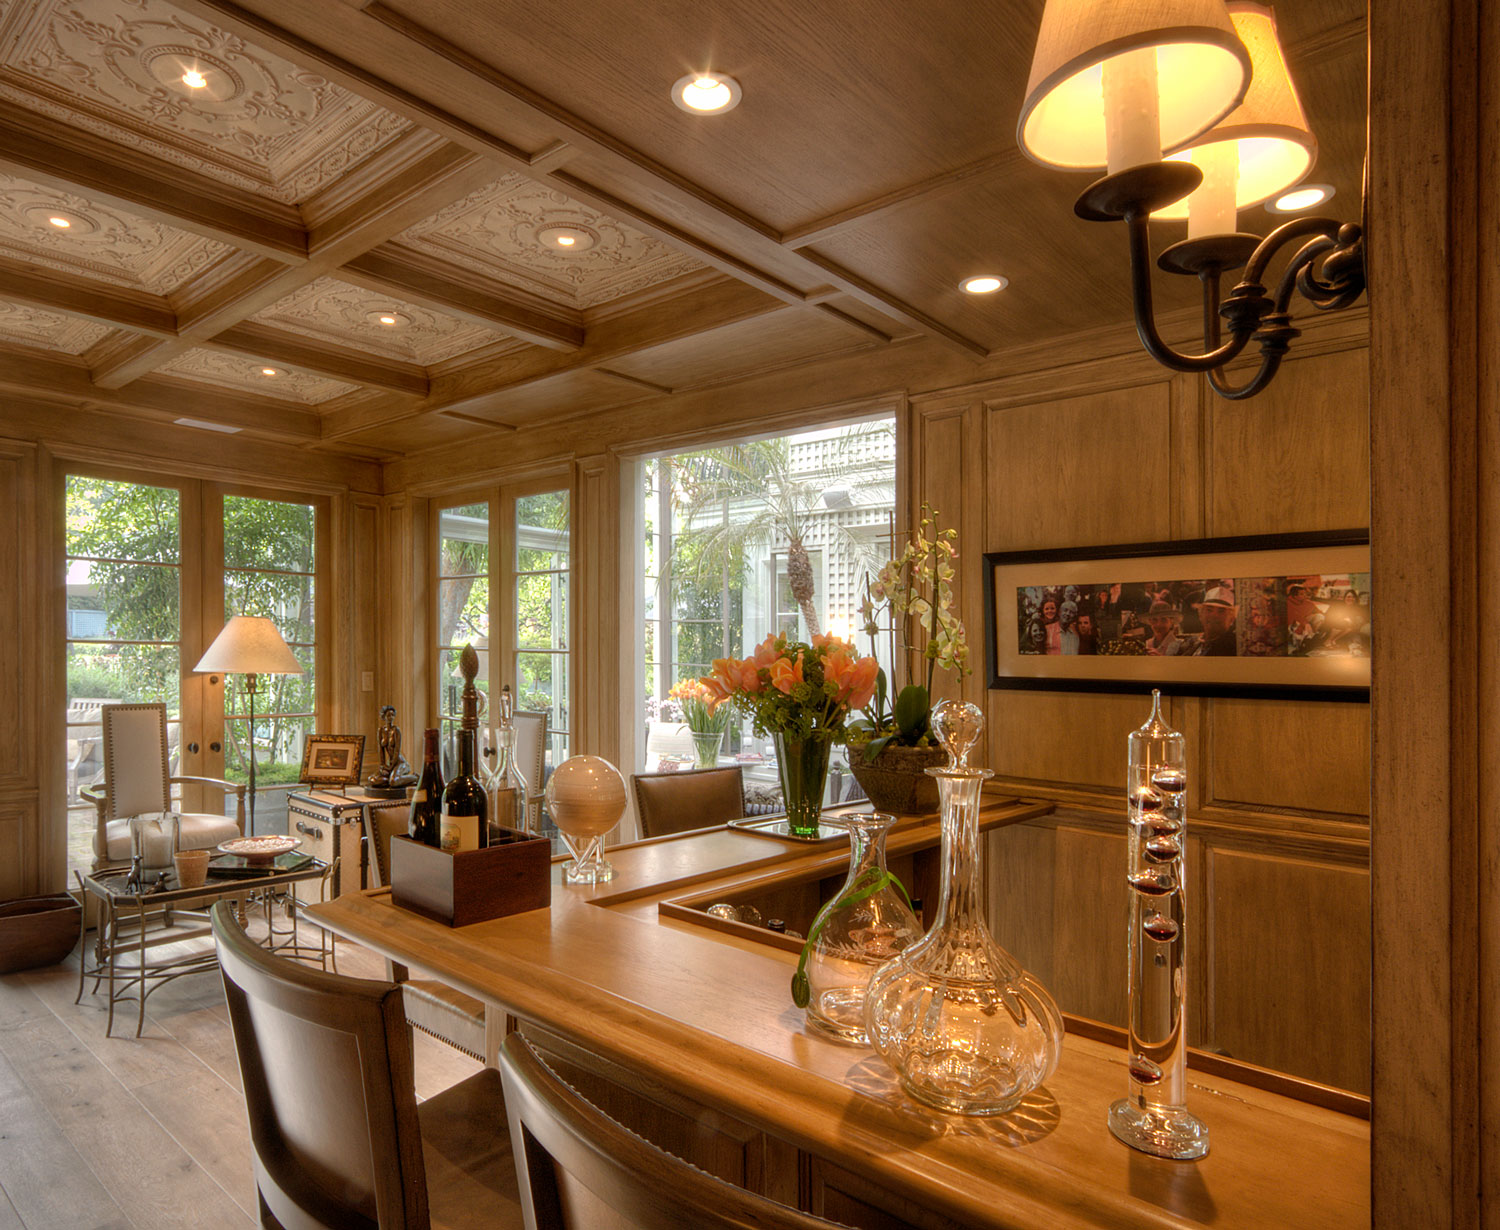 04-home-bar-wood-paneled-walls-coffered-ceiling-gary-drake-general-contractor.jpg